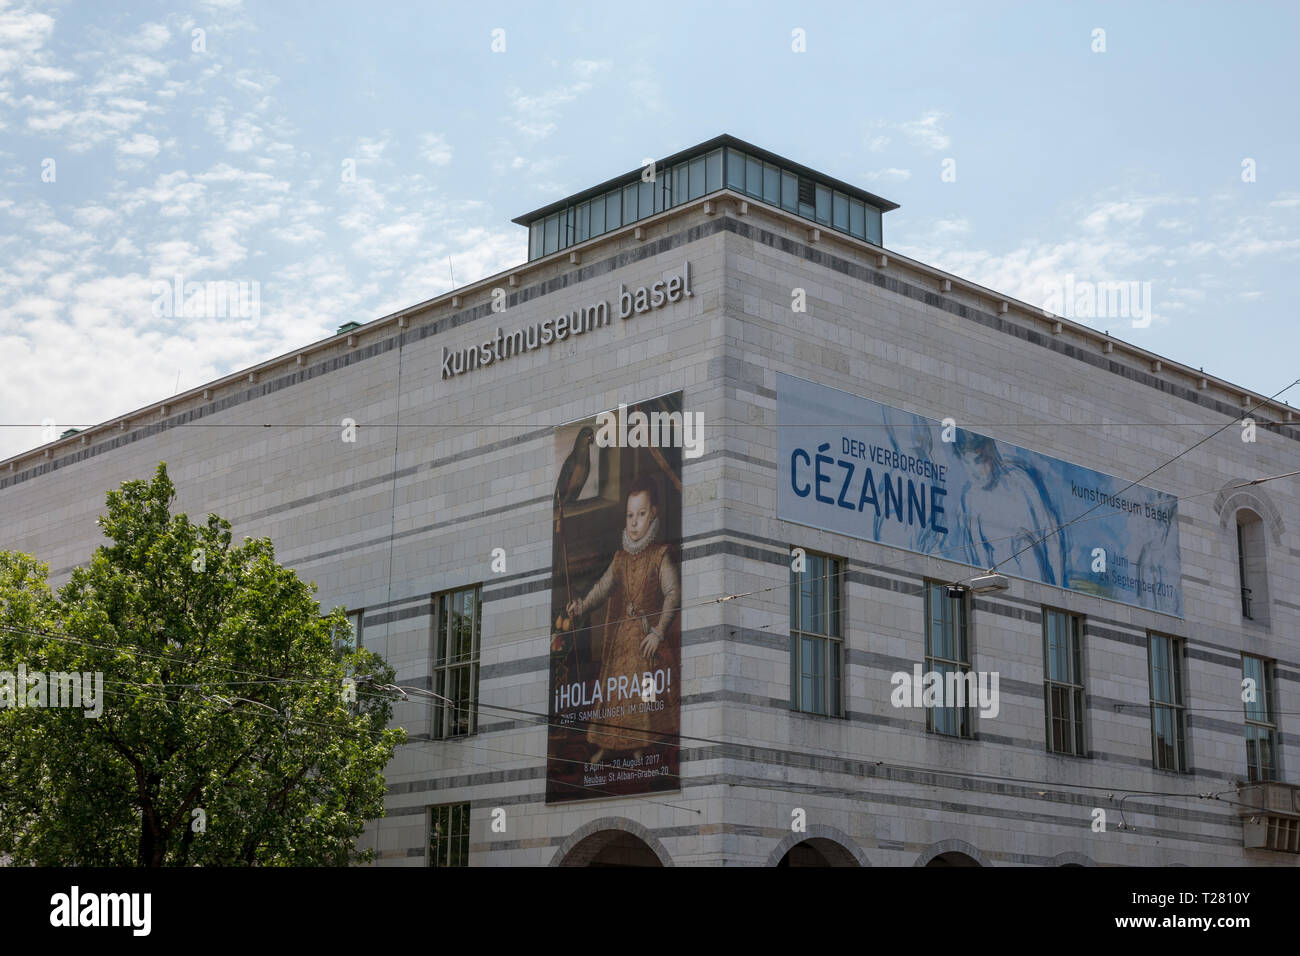 Basel, Switzerland - June 21, 2017: Kunstmuseum Basel houses, is the largest and most significant public art collection in Switzerland, and is listed  Stock Photo